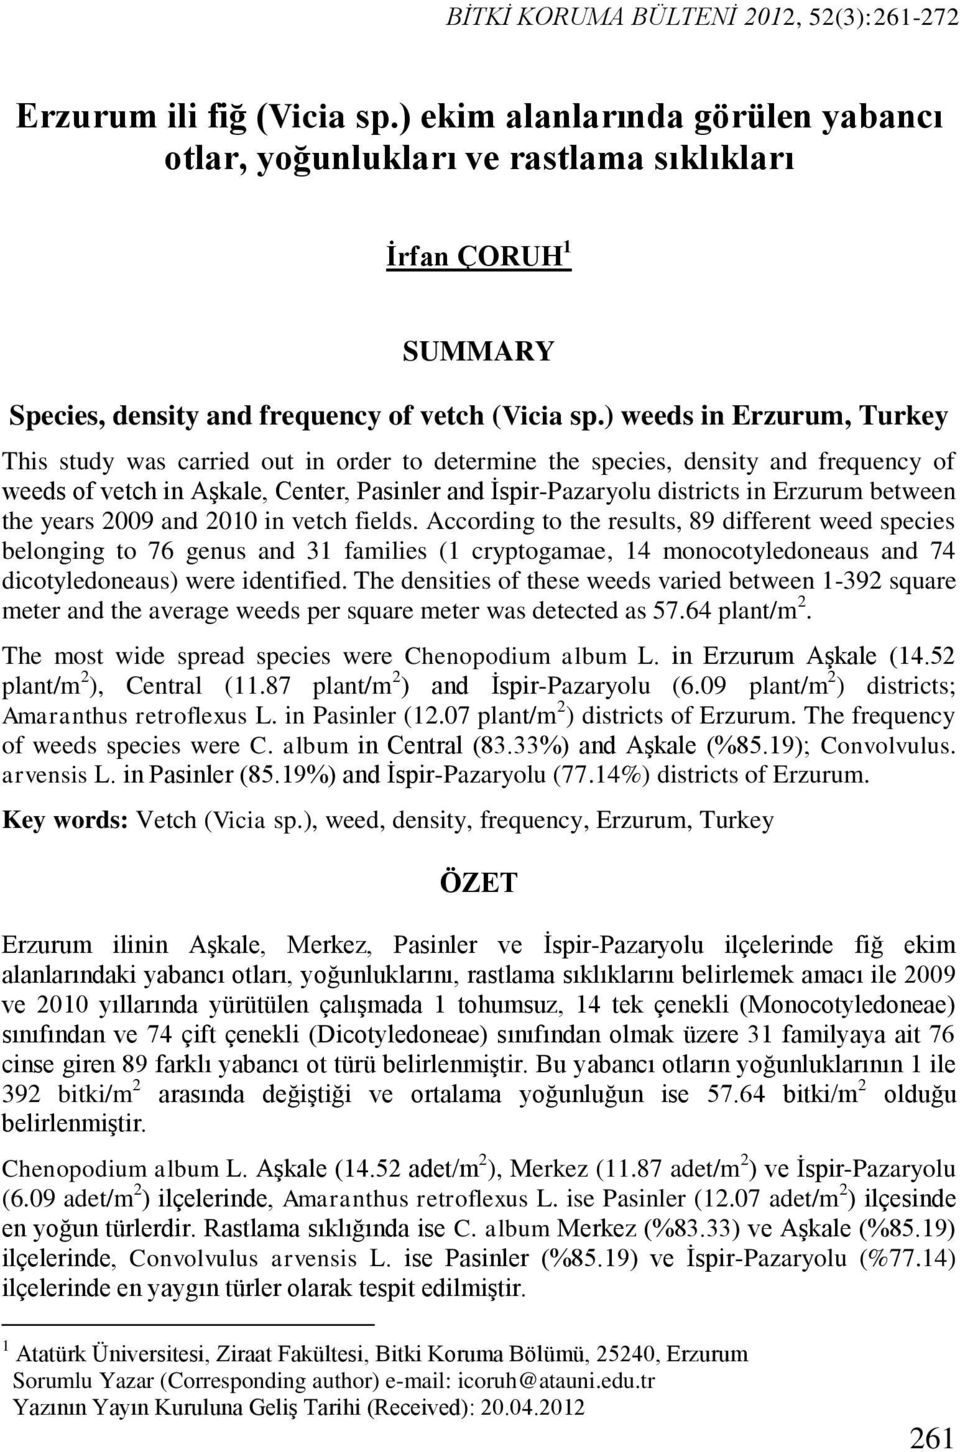 weeds in Erzurum, Turkey This study was carried out in order to determine the species, density and frequency of weeds of vetch in AĢkale, Center, Pasinler and Ġspir-Pazaryolu districts in Erzurum